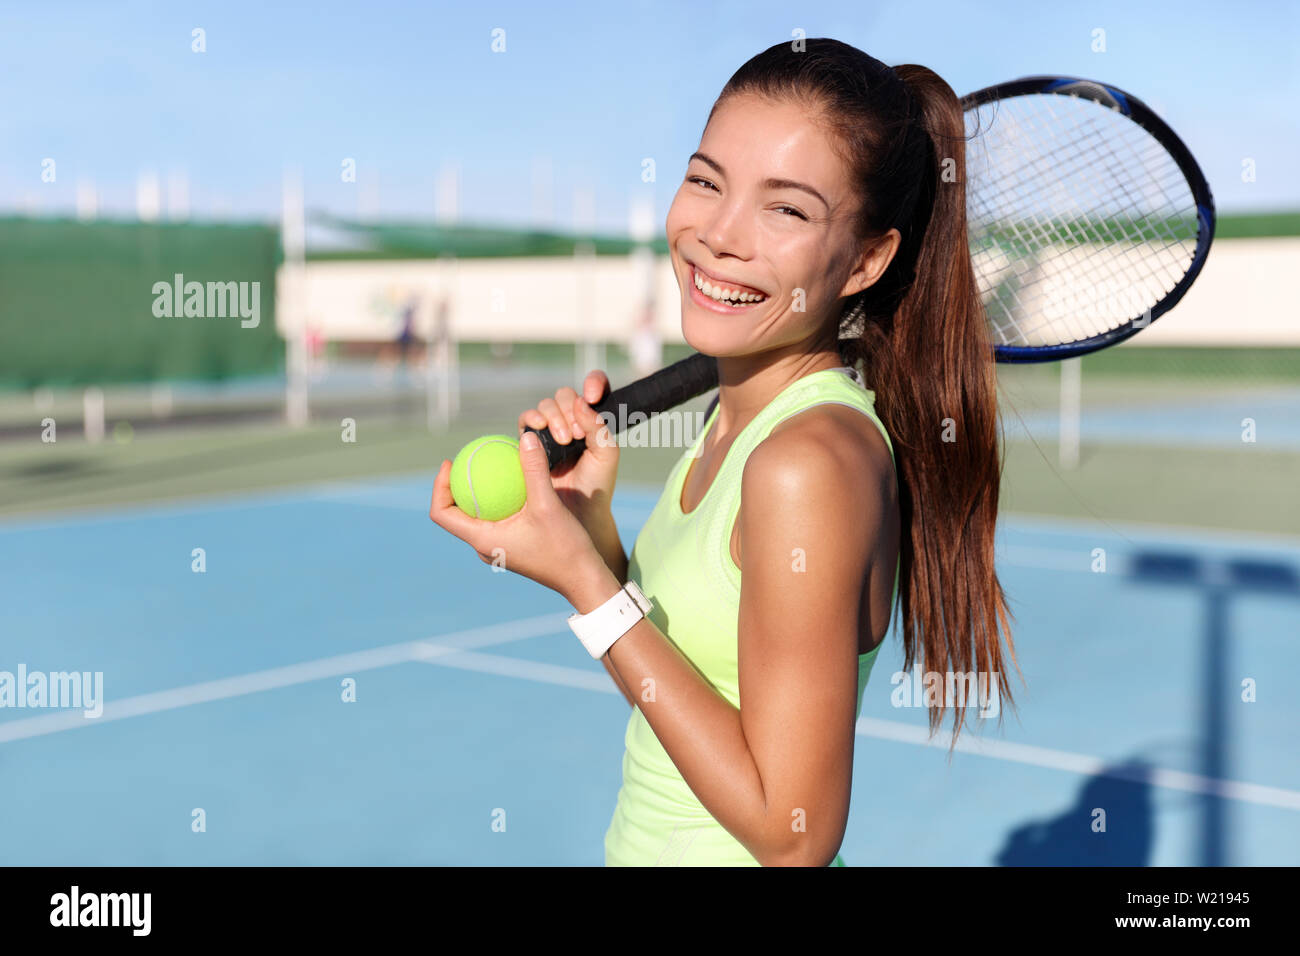 Happy tennis player girl holding racquet / tennis racket and ball on outdoor court portrait. Asian young woman fitness trainer ready for playing game match during summer. Sports activity. Stock Photo